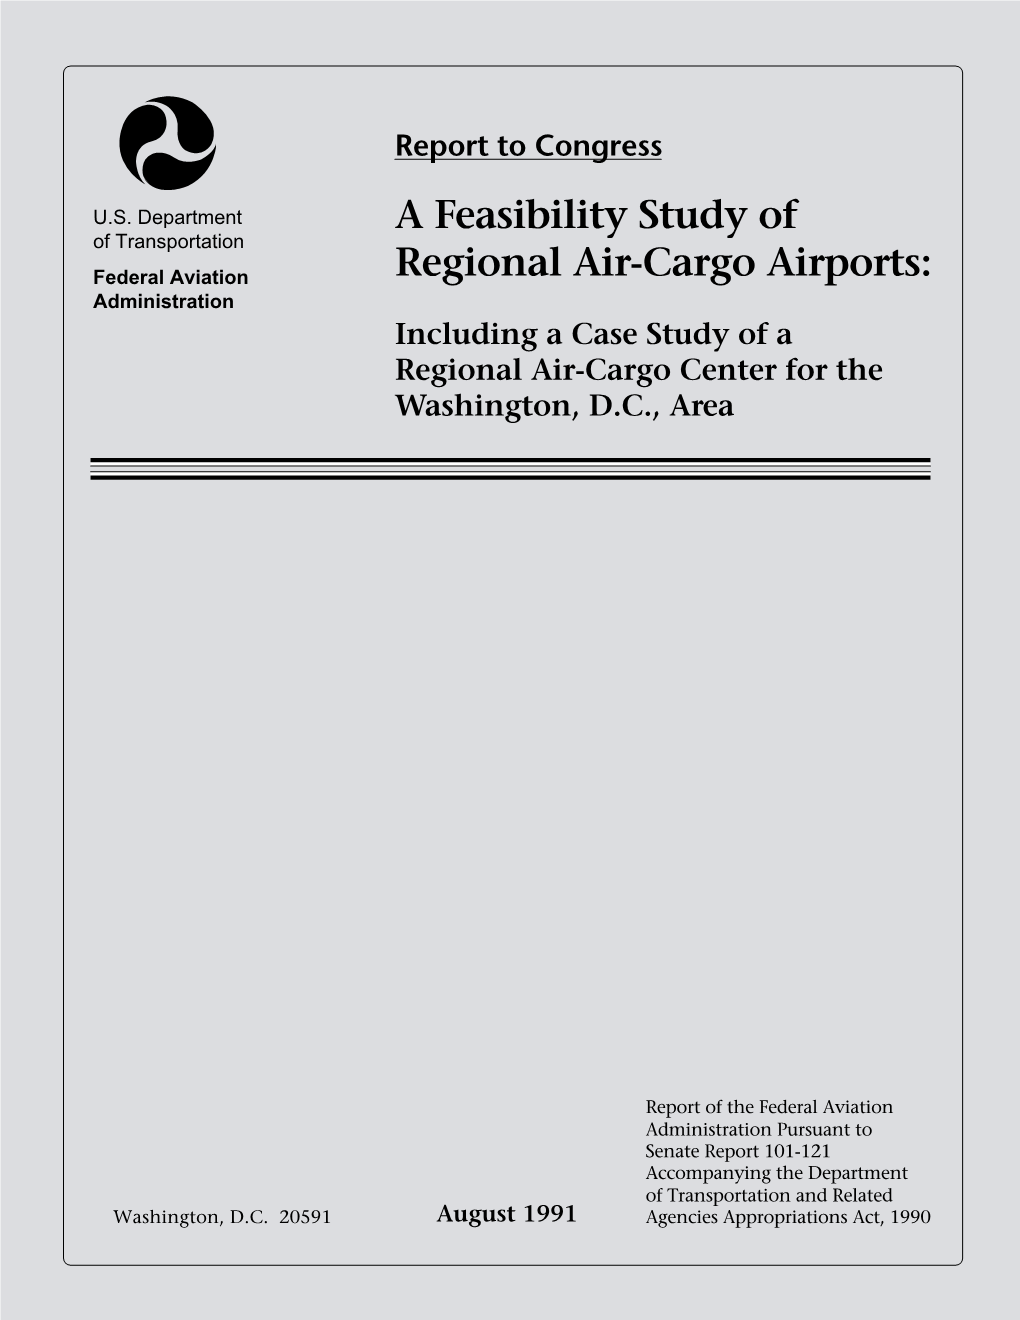 A Feasibility Study of Regional Air-Cargo Airports